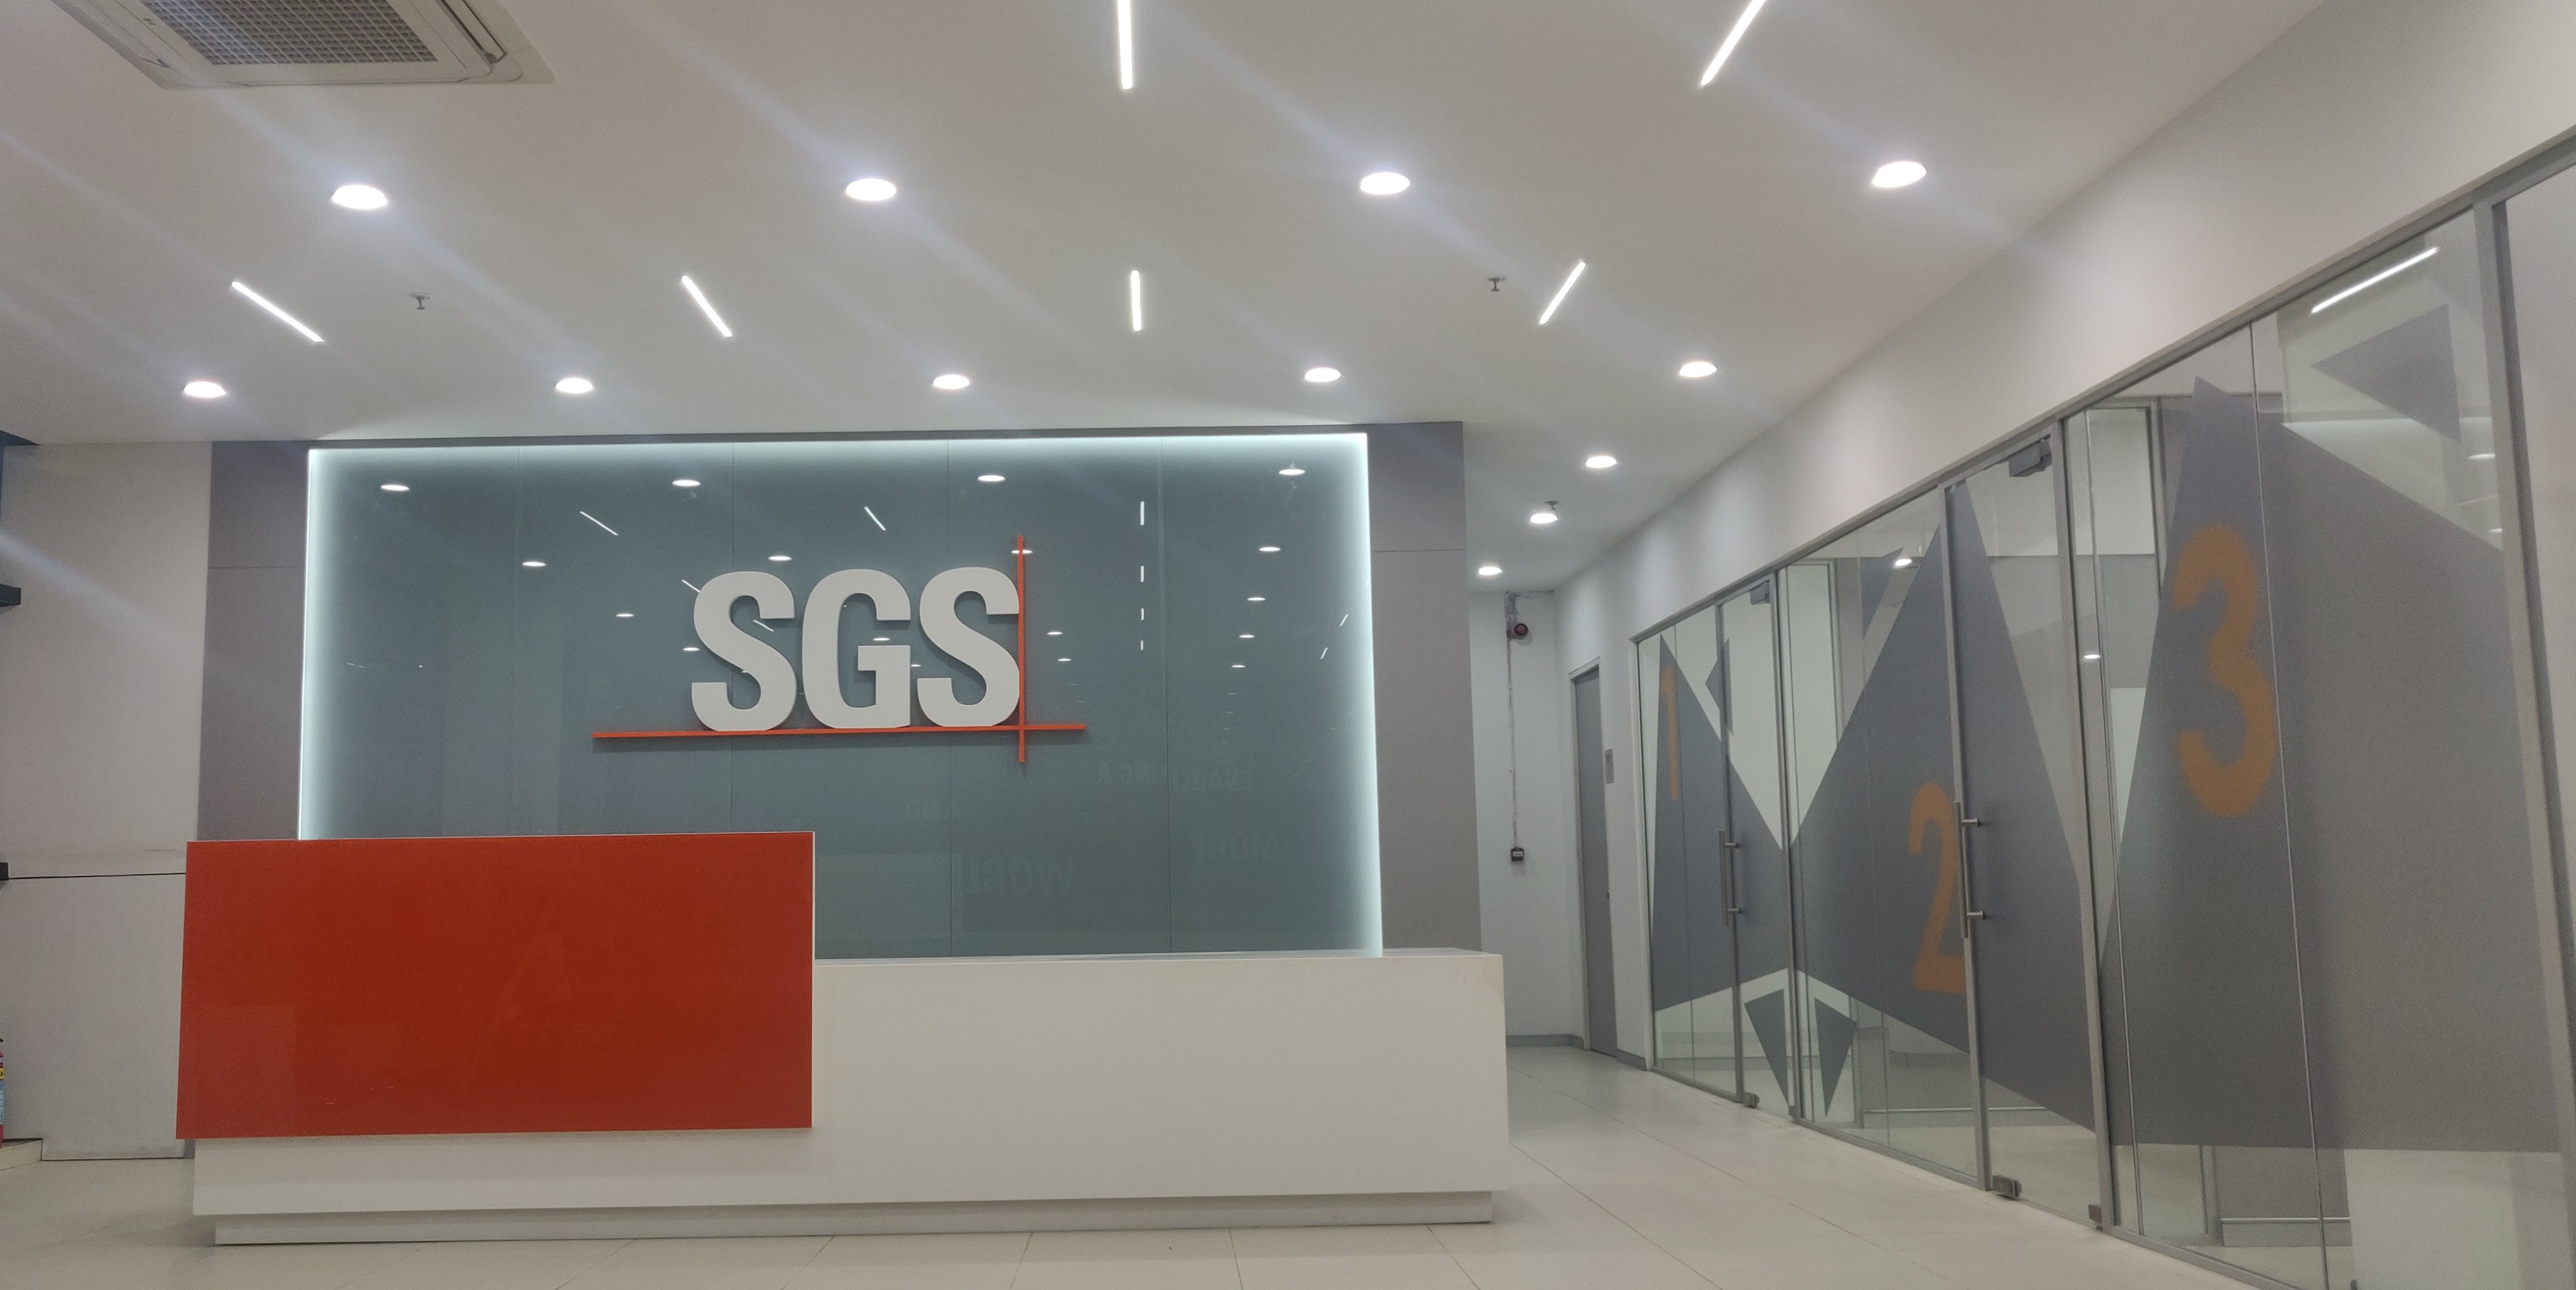 sgs opens one of india's largest laboratories for automotive quality testing in chakan, pune | sgs